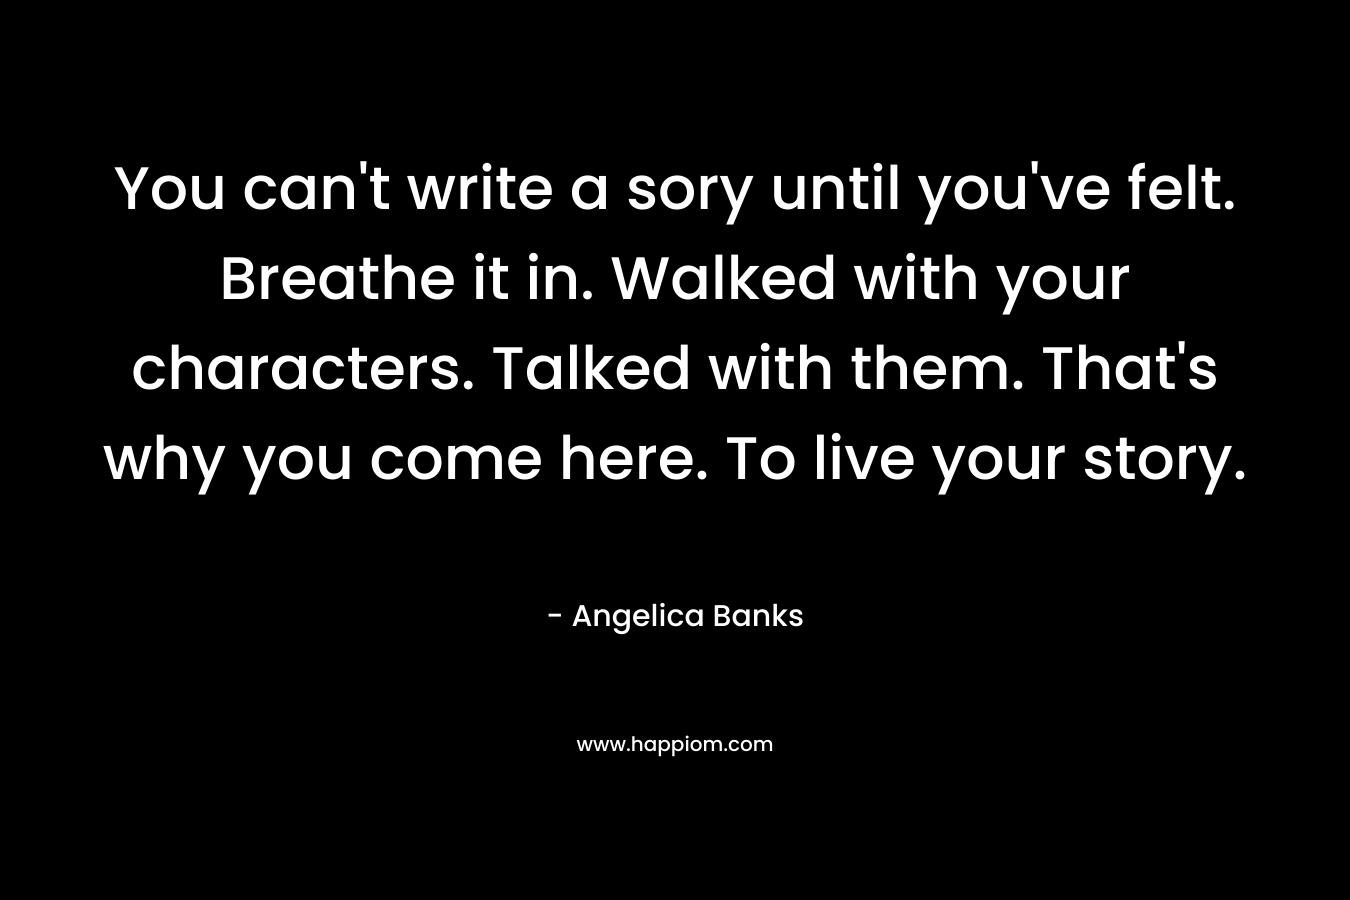 You can’t write a sory until you’ve felt. Breathe it in. Walked with your characters. Talked with them. That’s why you come here. To live your story. – Angelica Banks